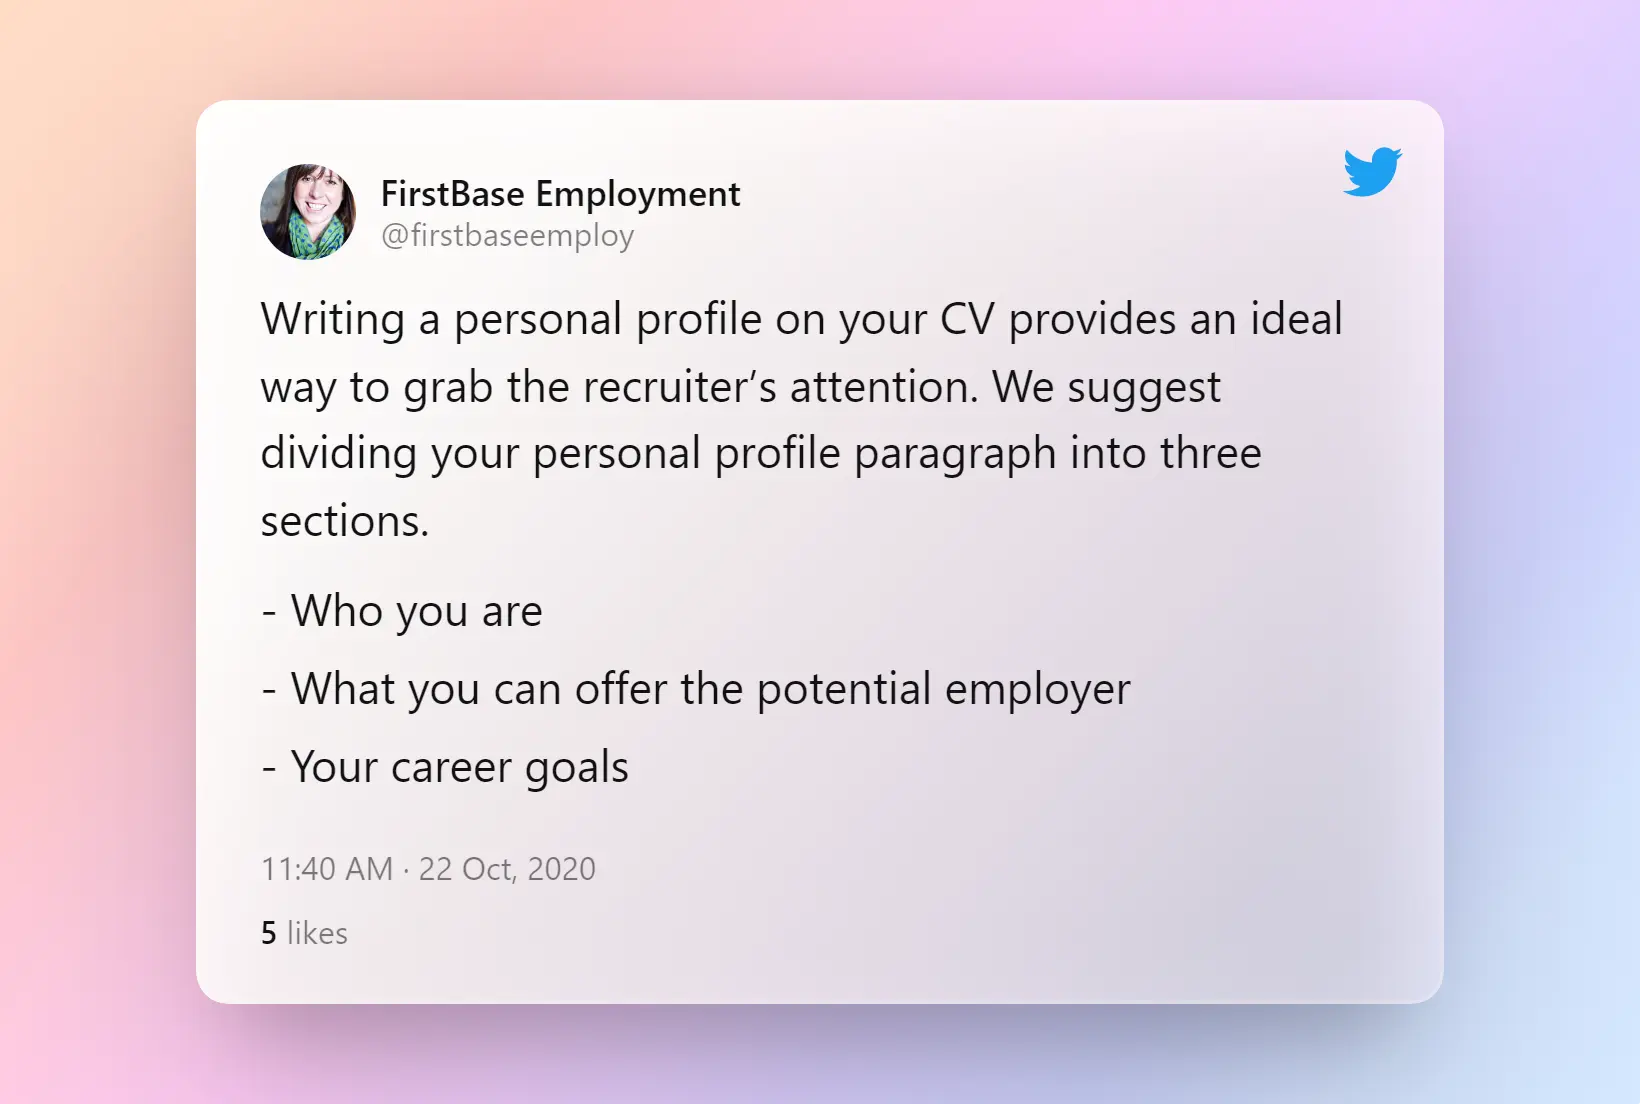 tweet about personal profile and how to grab the recruiter's attention